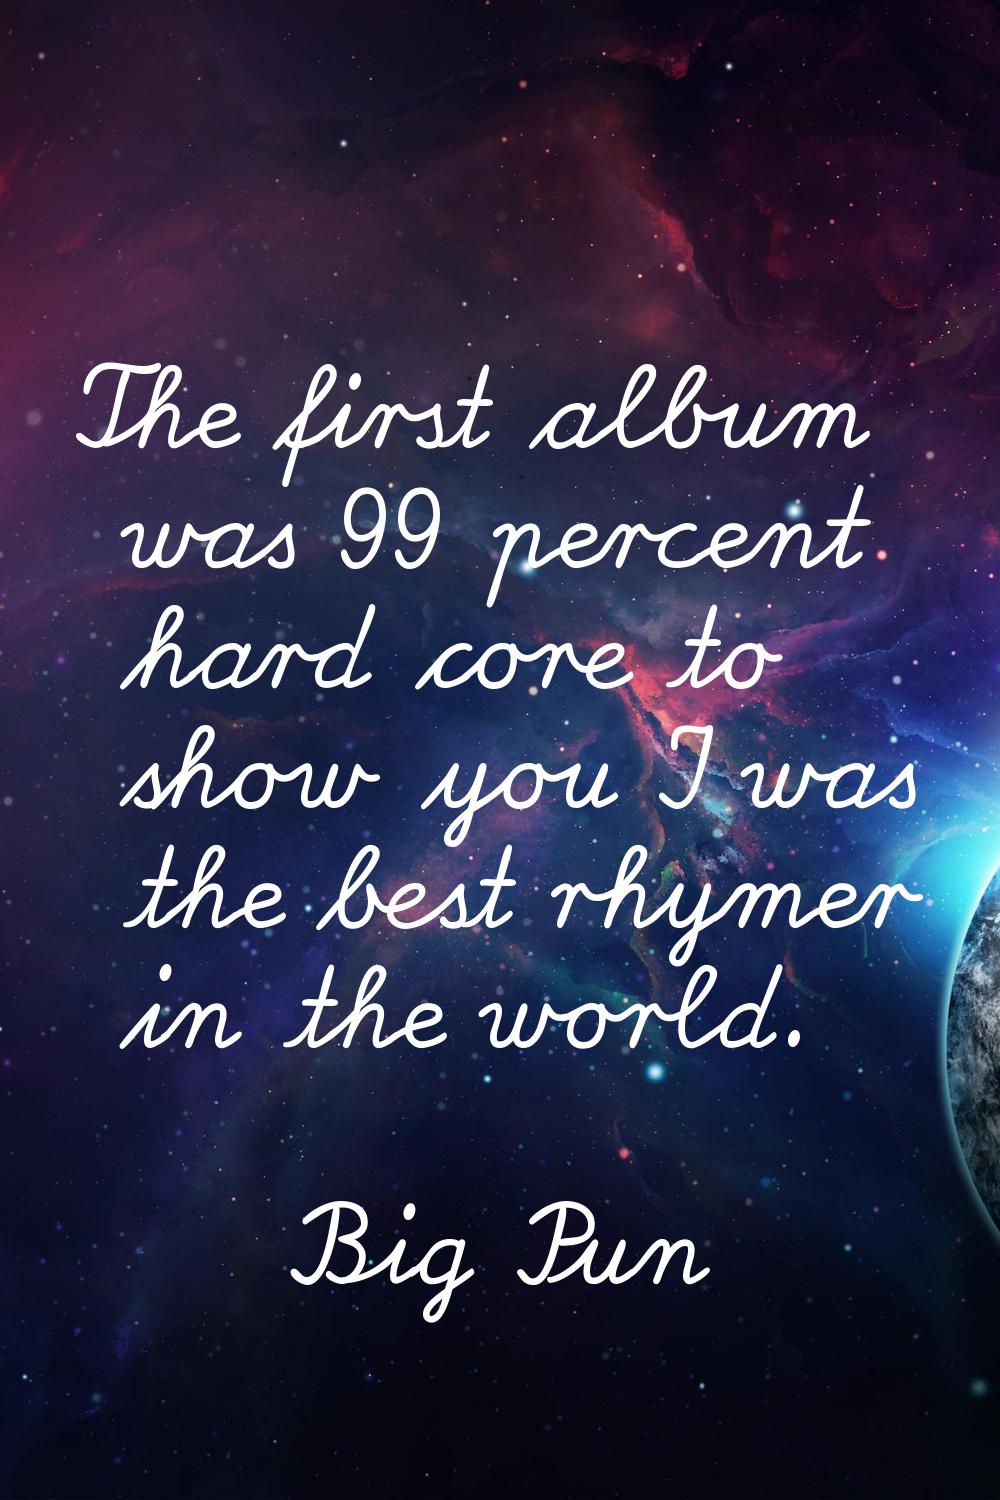 The first album was 99 percent hard core to show you I was the best rhymer in the world.